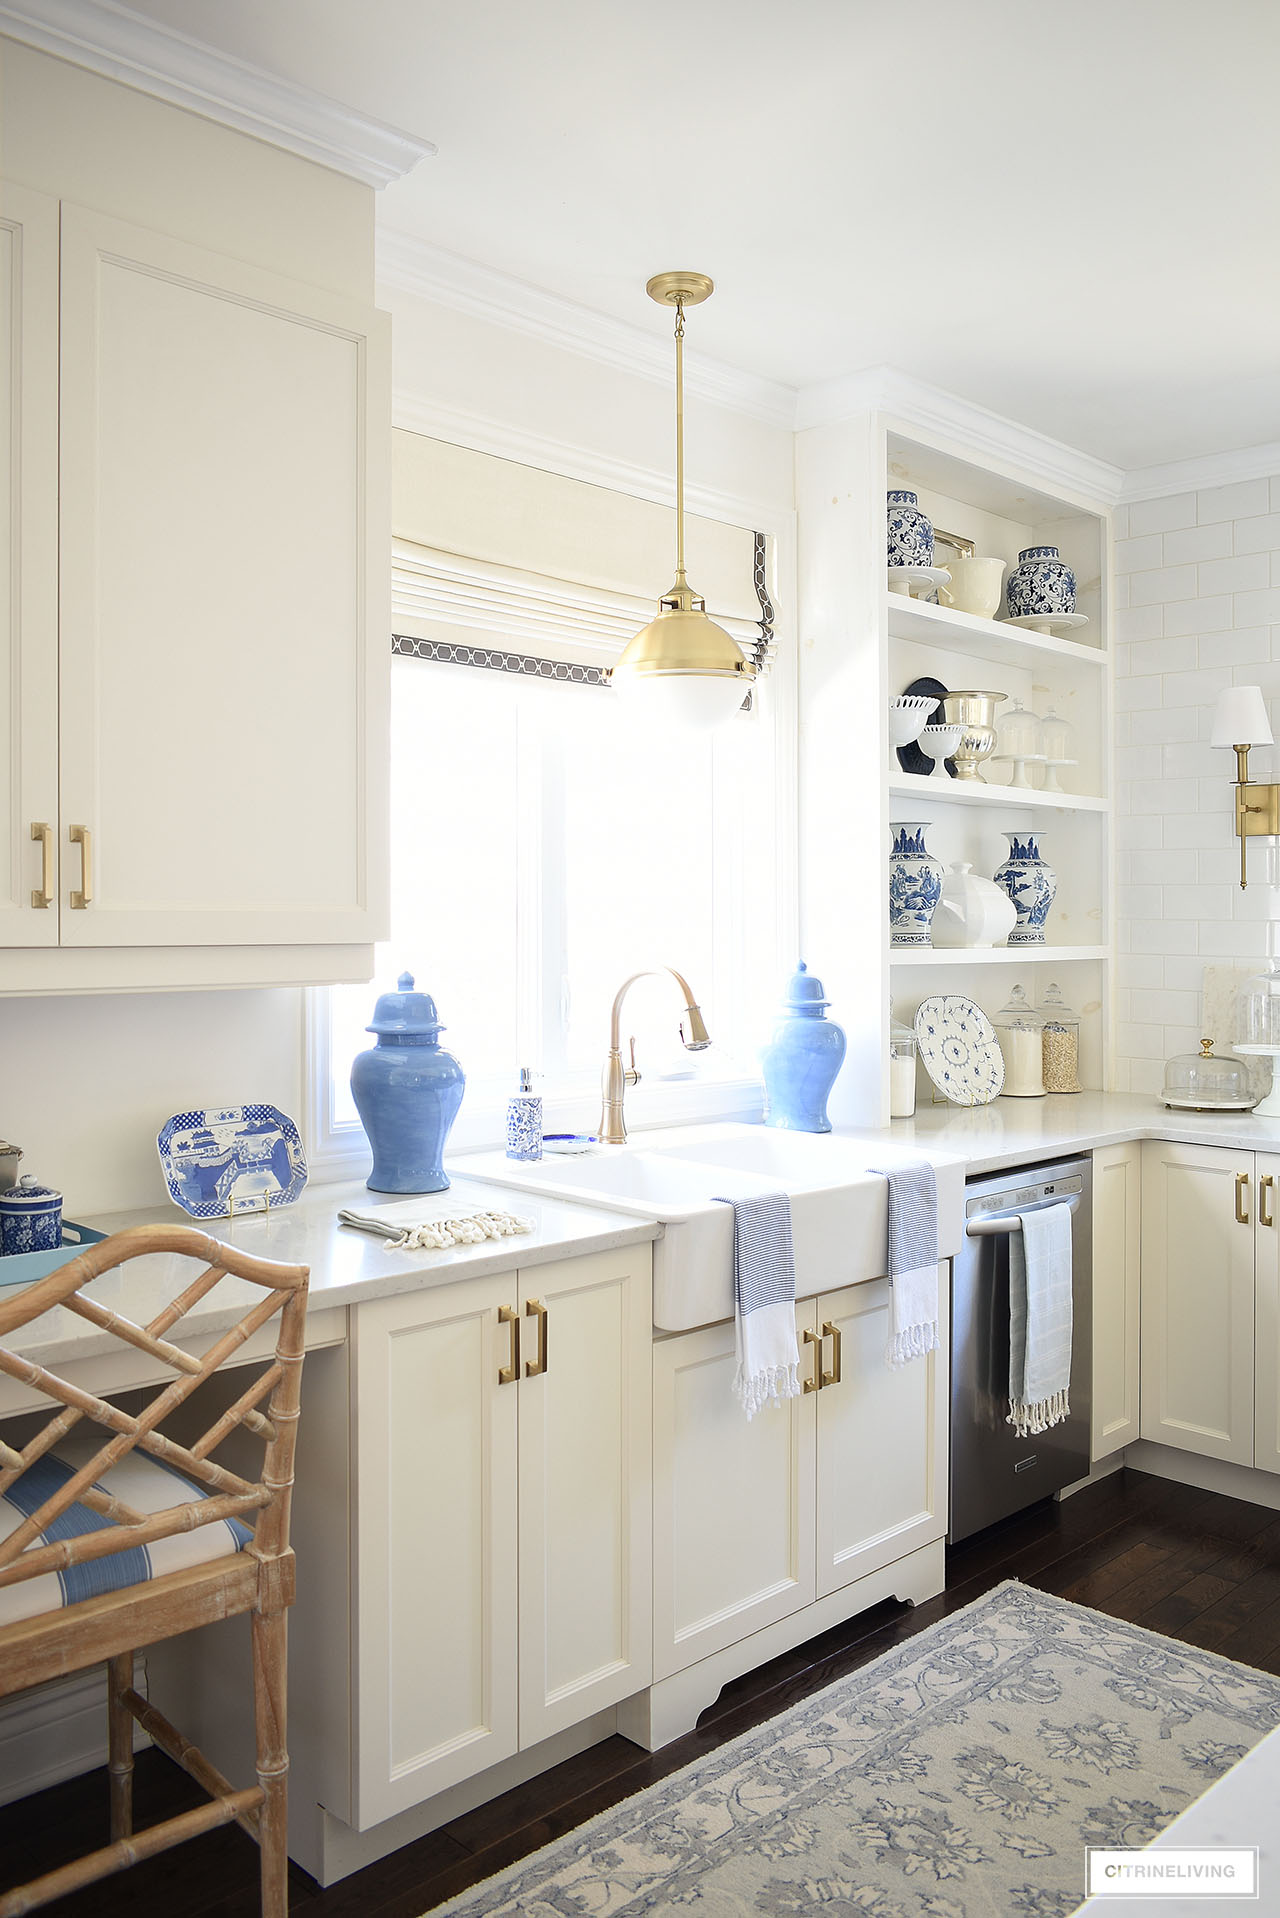 White kitchen farm sink styled with blue ginger jars, blue and white chinoiserie pieces and pretty tea towels.